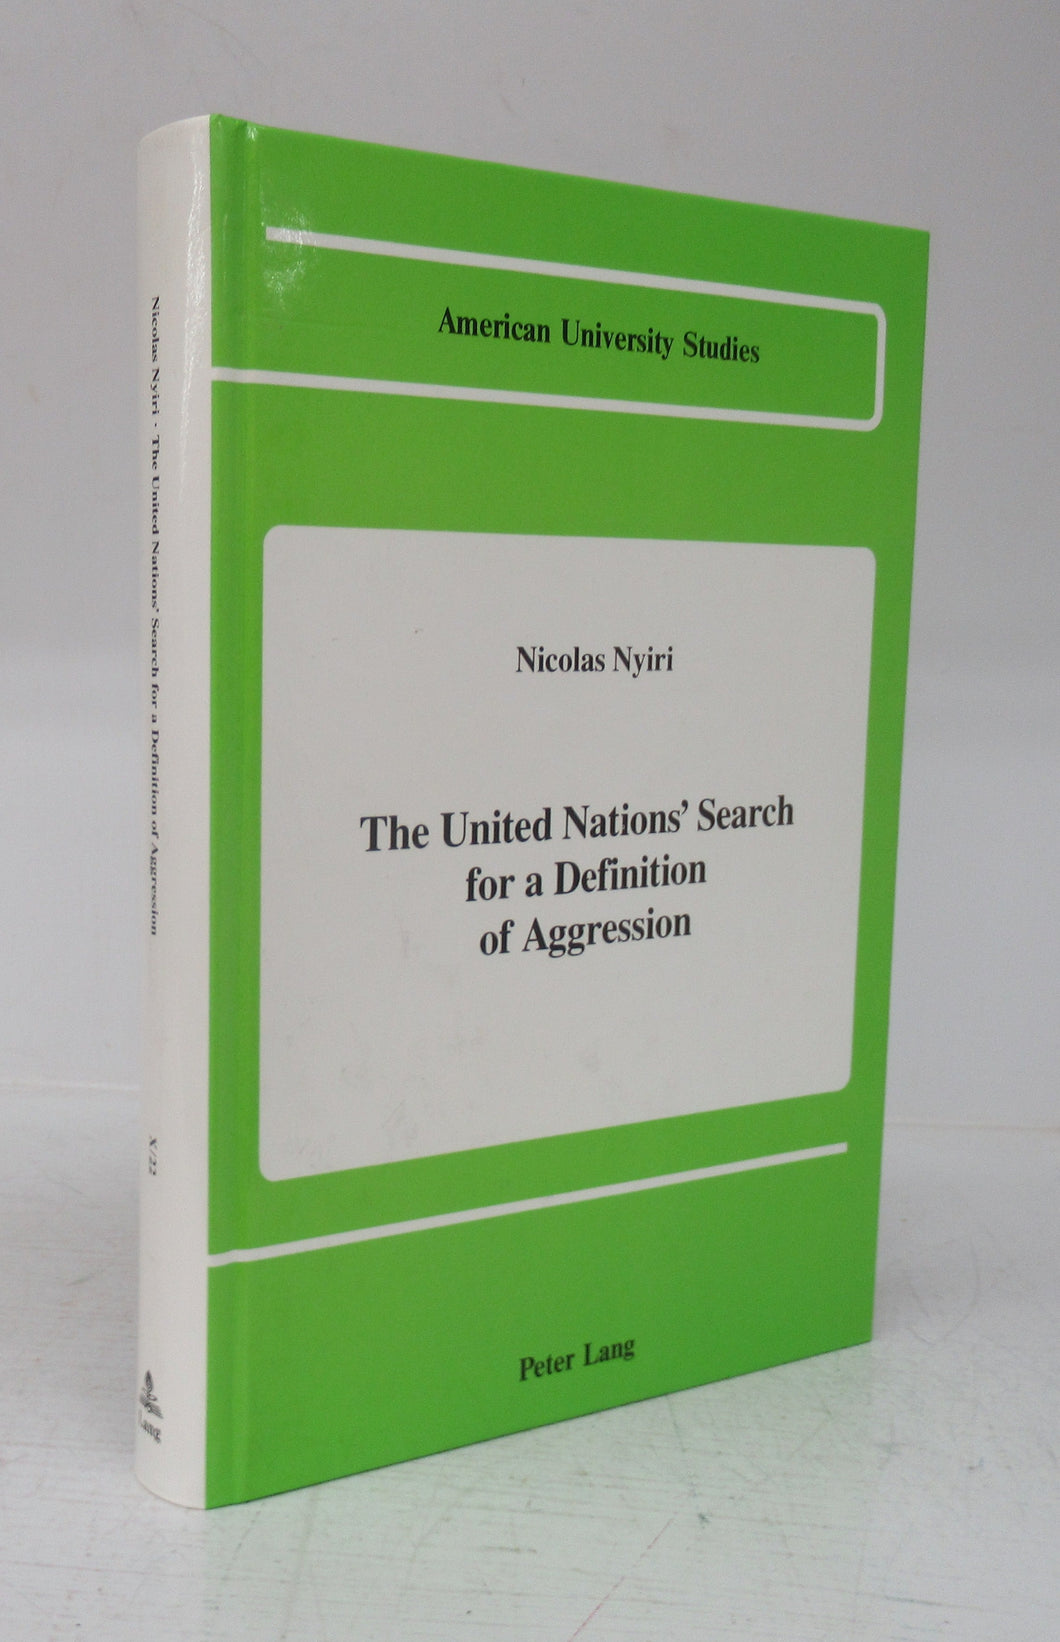 The United Nations' Search for a Definition of Aggression